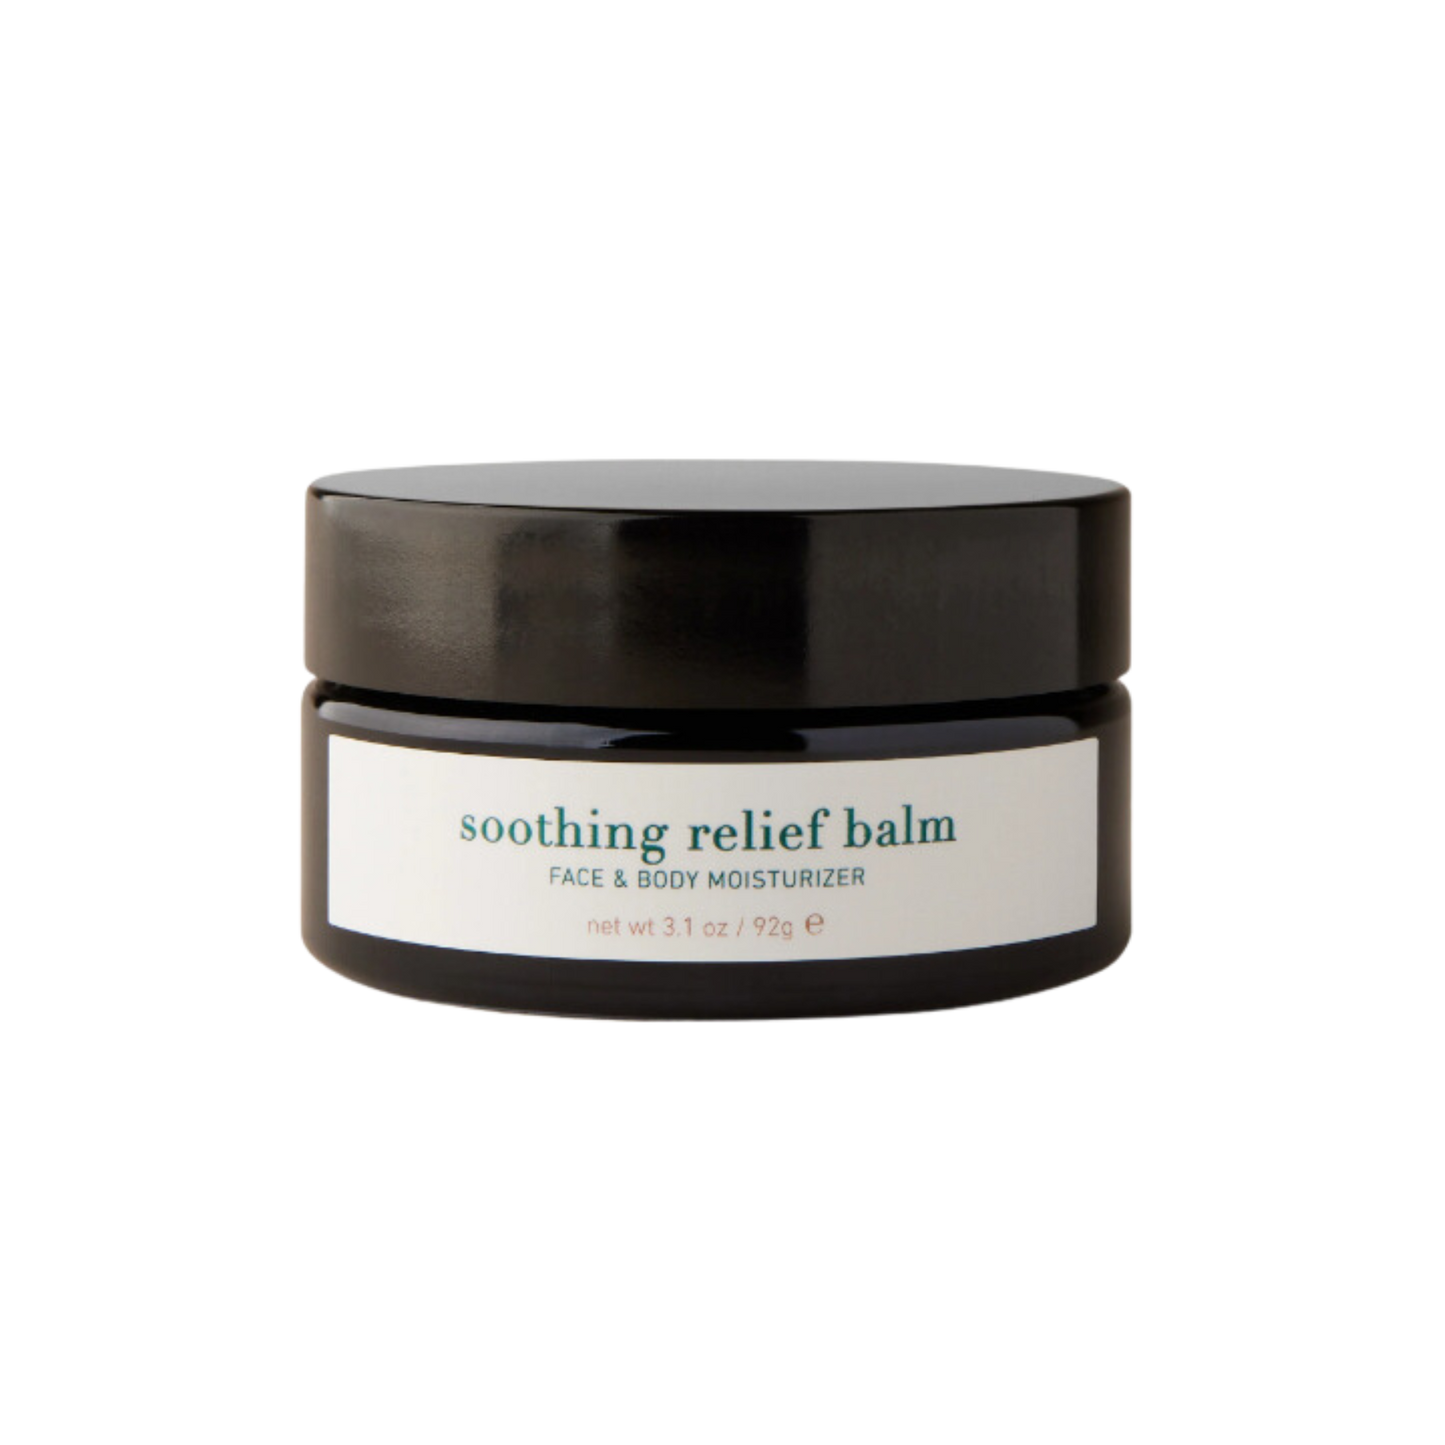 ISun Soothing Relief Balm - Face & Body Moisturizer